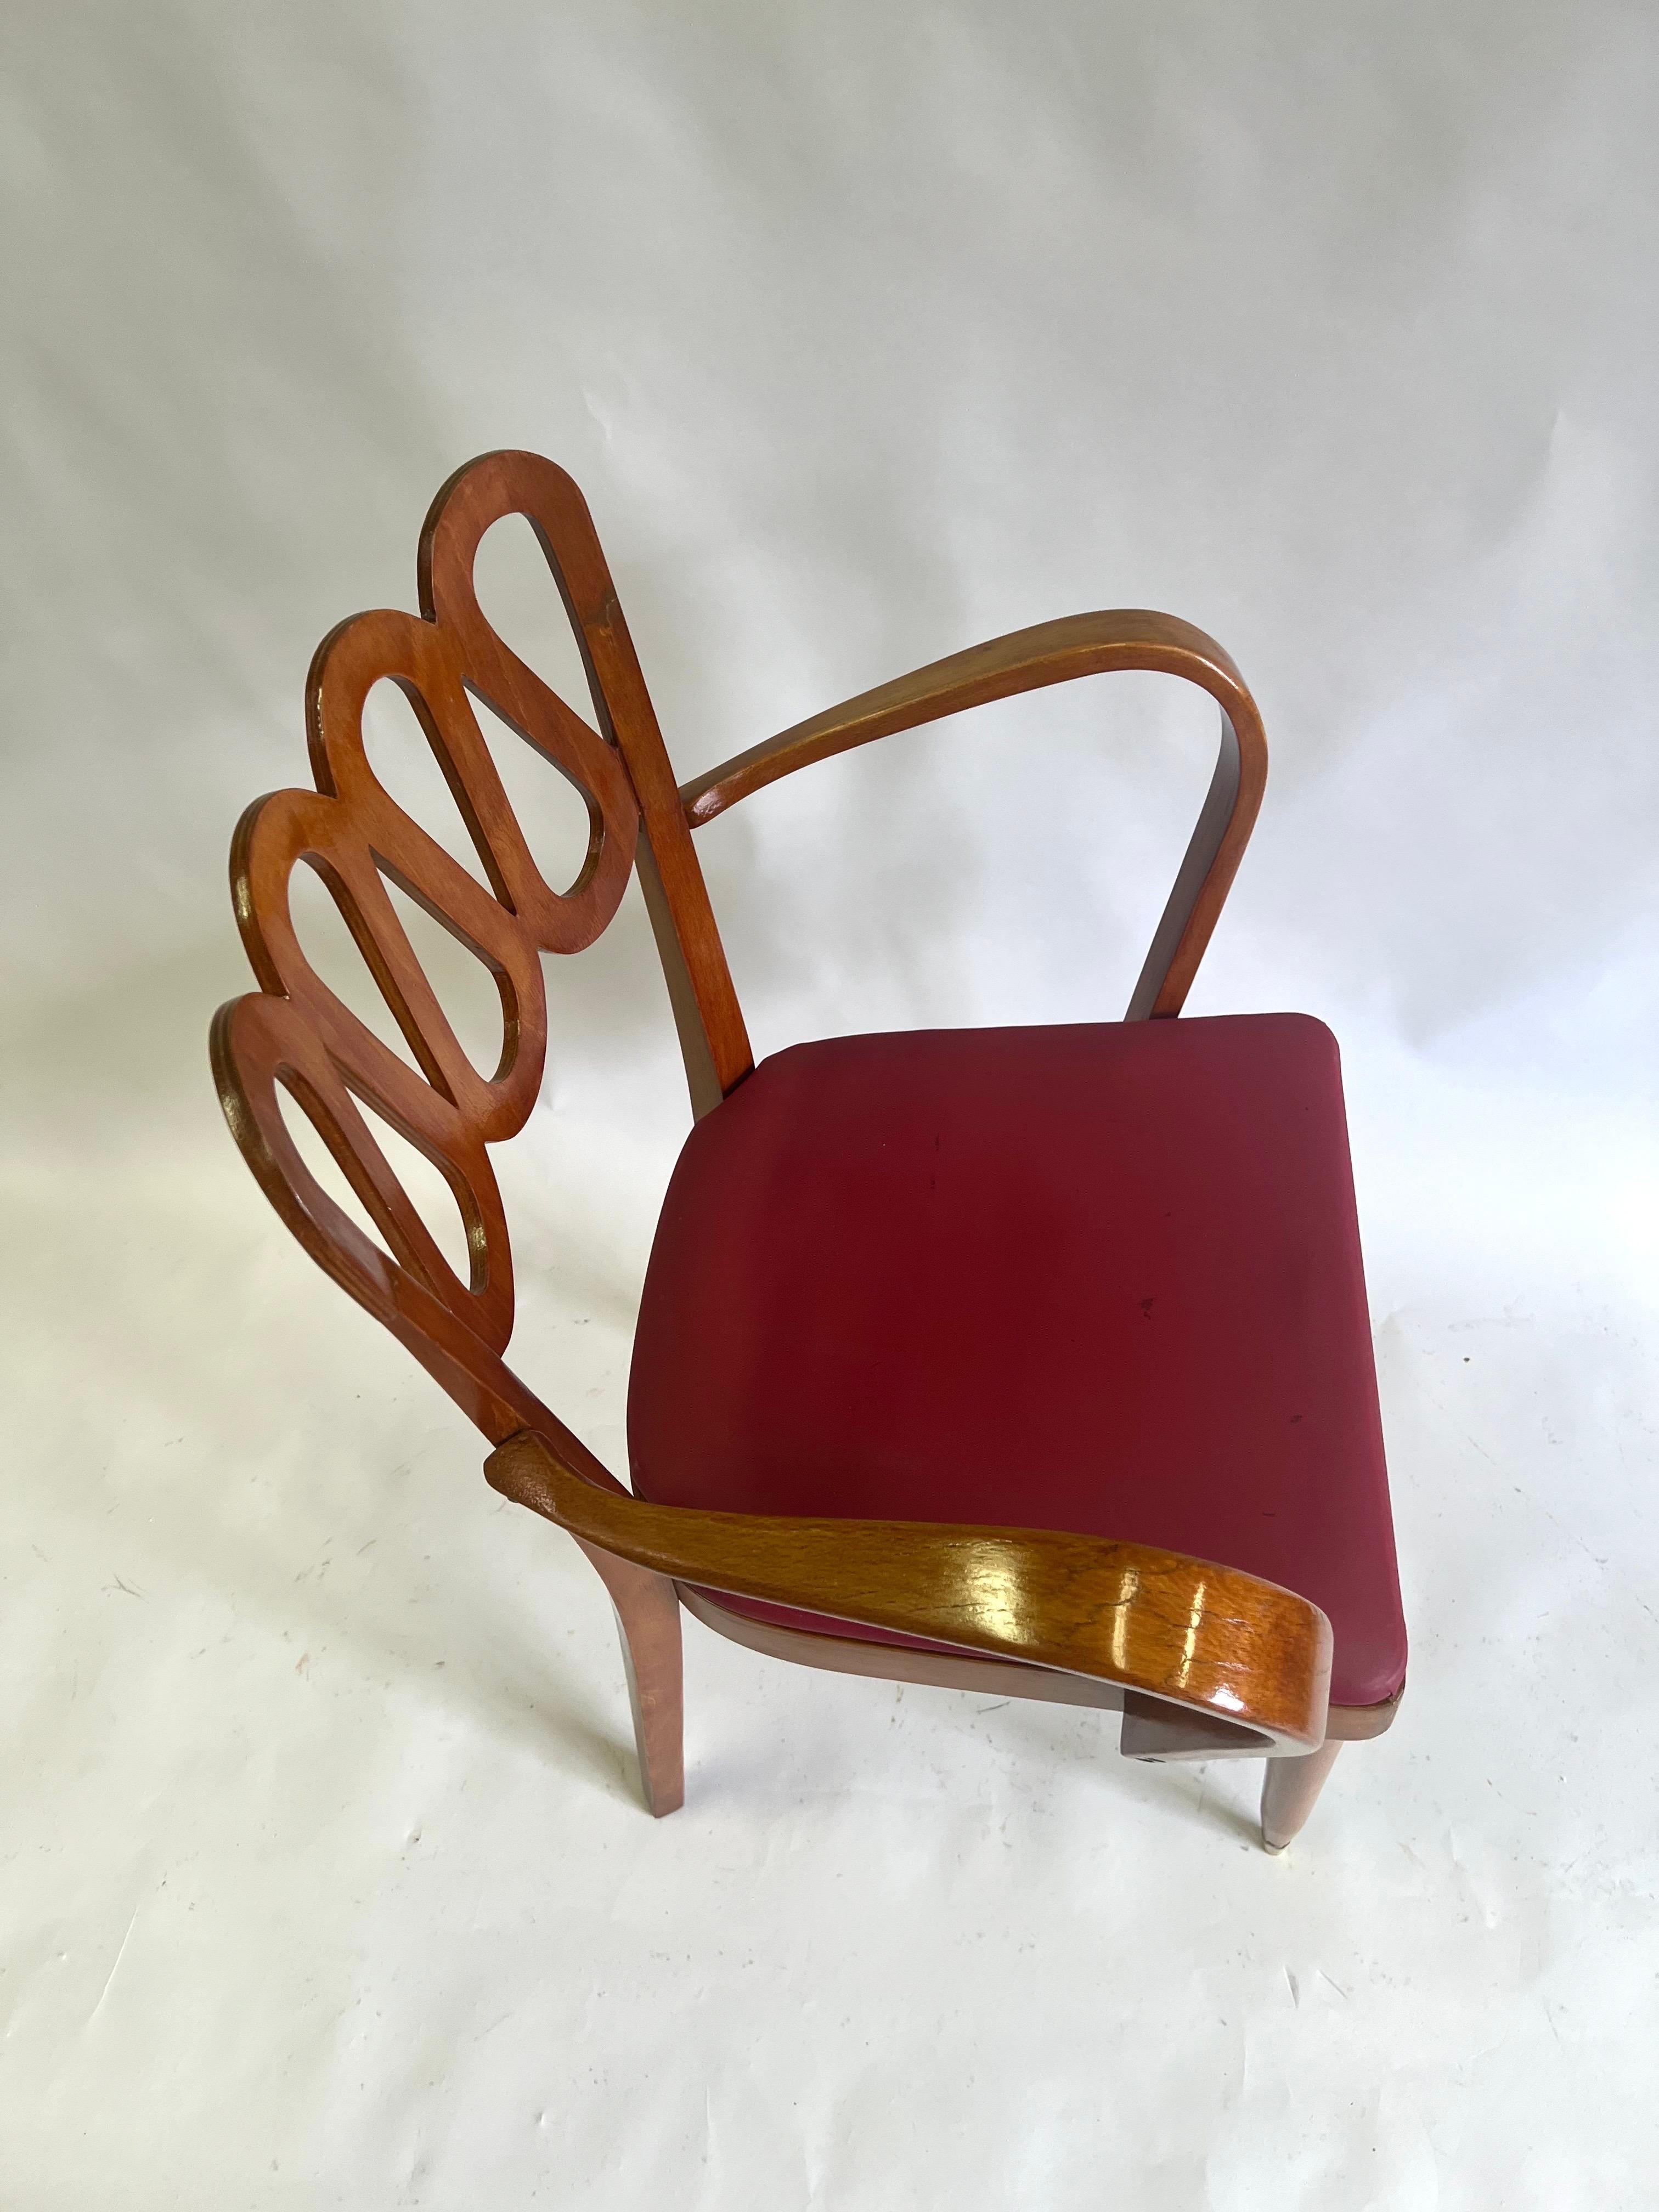 Italian Mid-Century Modern Neoclassic Lounge, Desk or Vanity Chair by Gio Ponti  For Sale 5